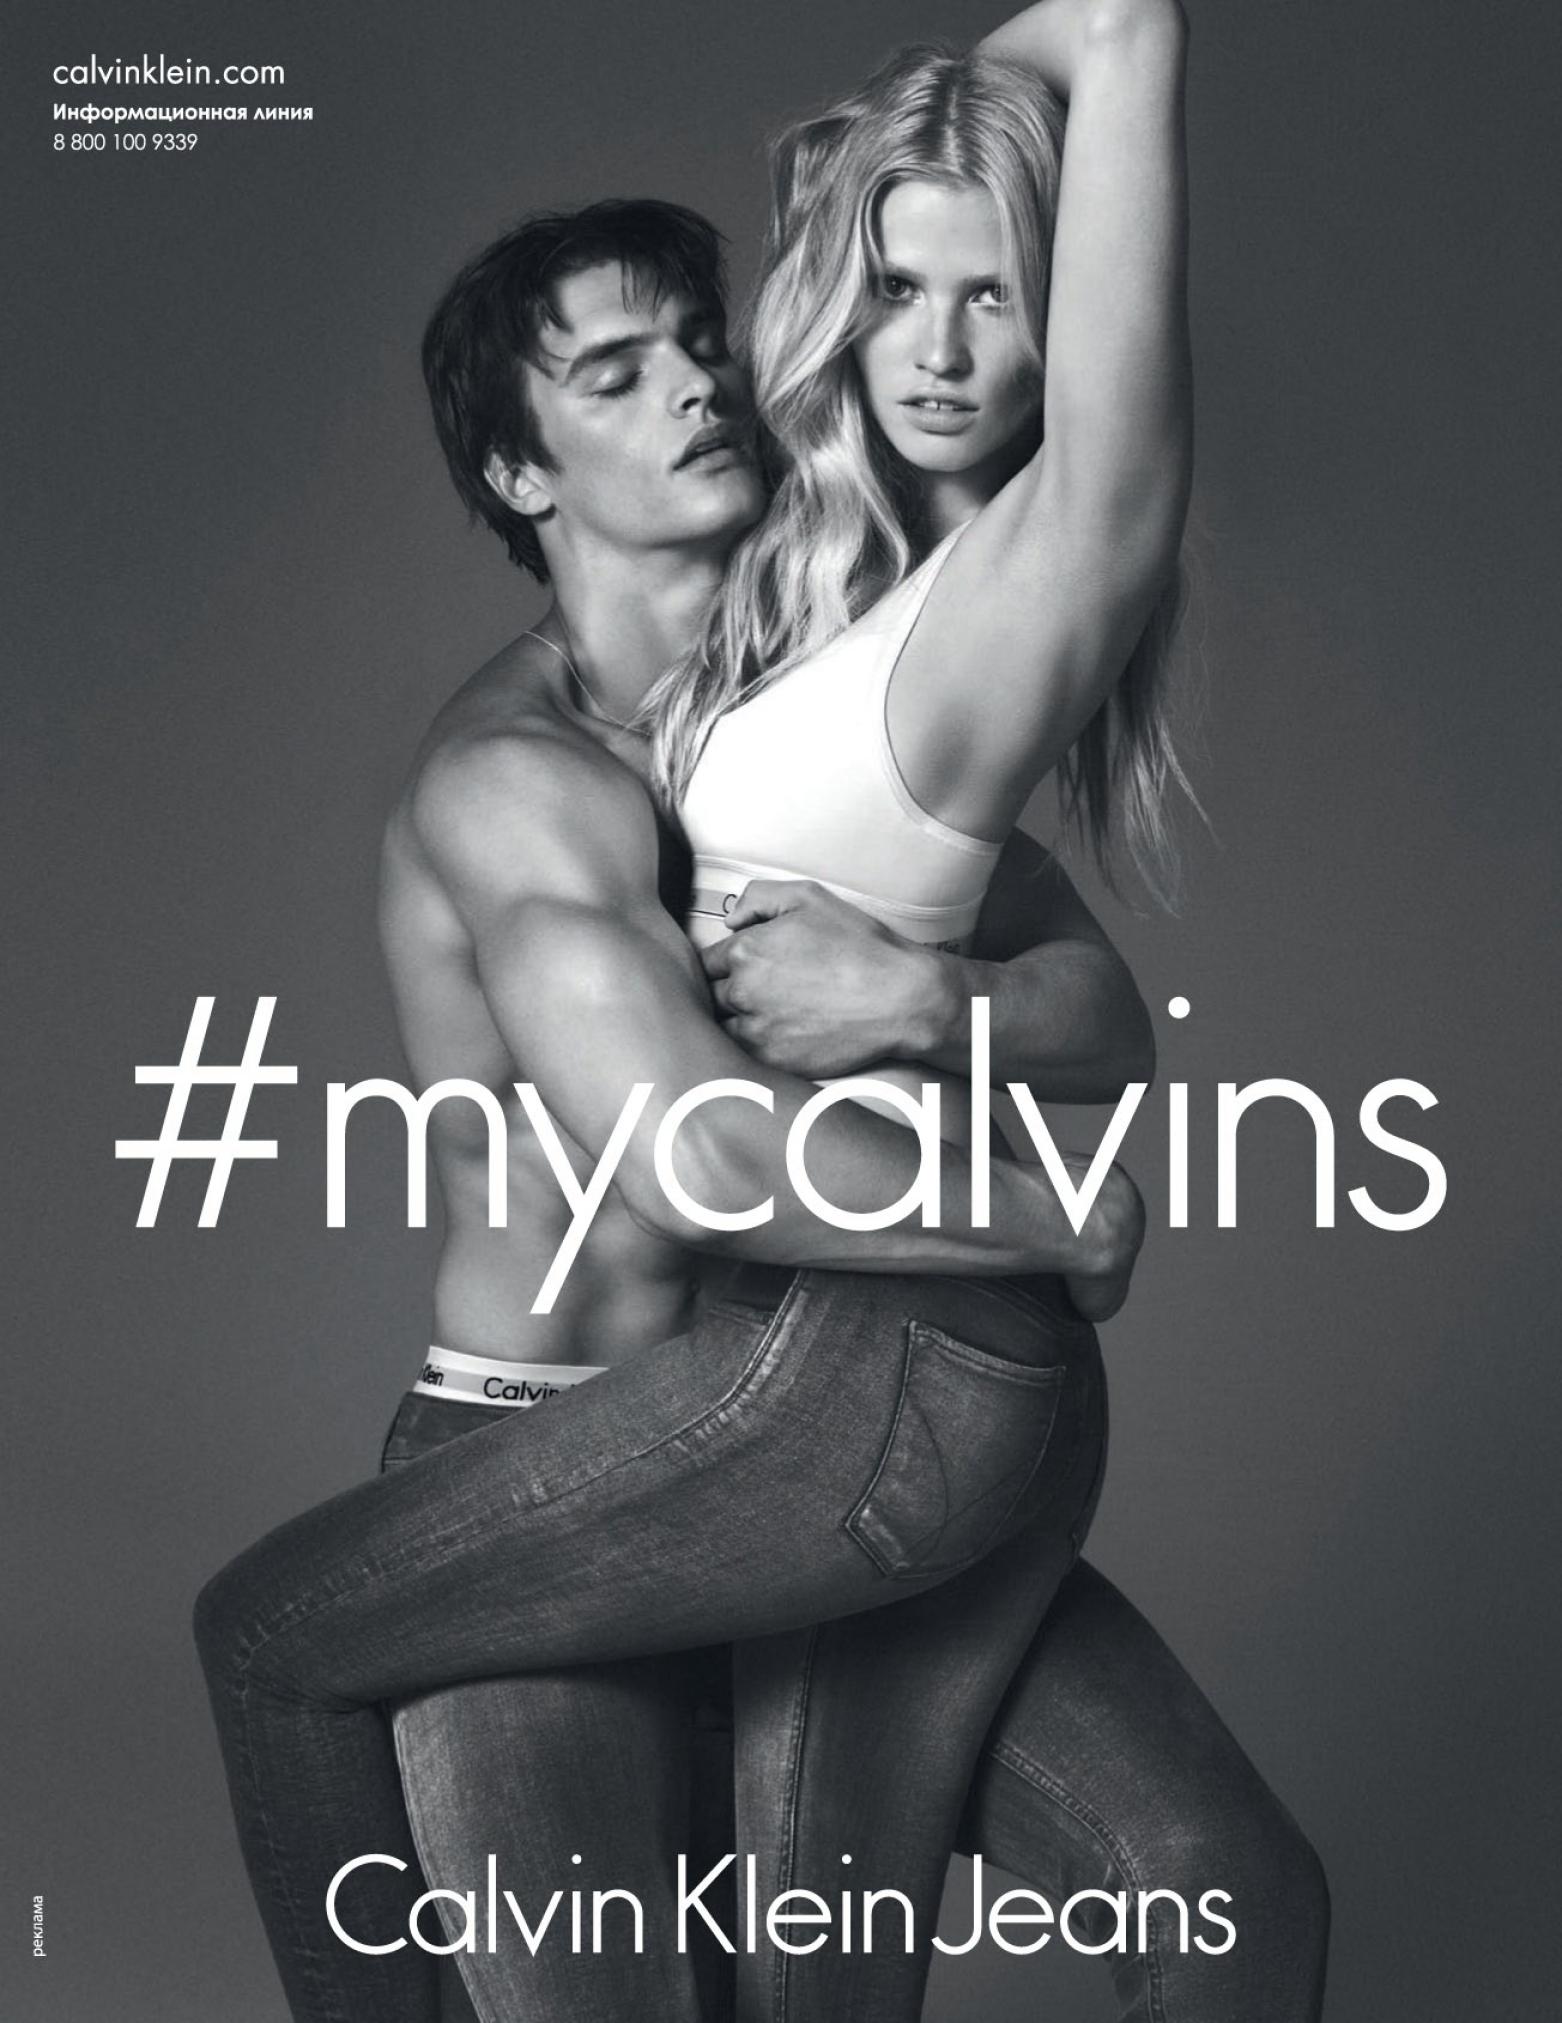 New Photo from Calvin Klein Jeans Fall 2014 Campaign with Matthew Terry